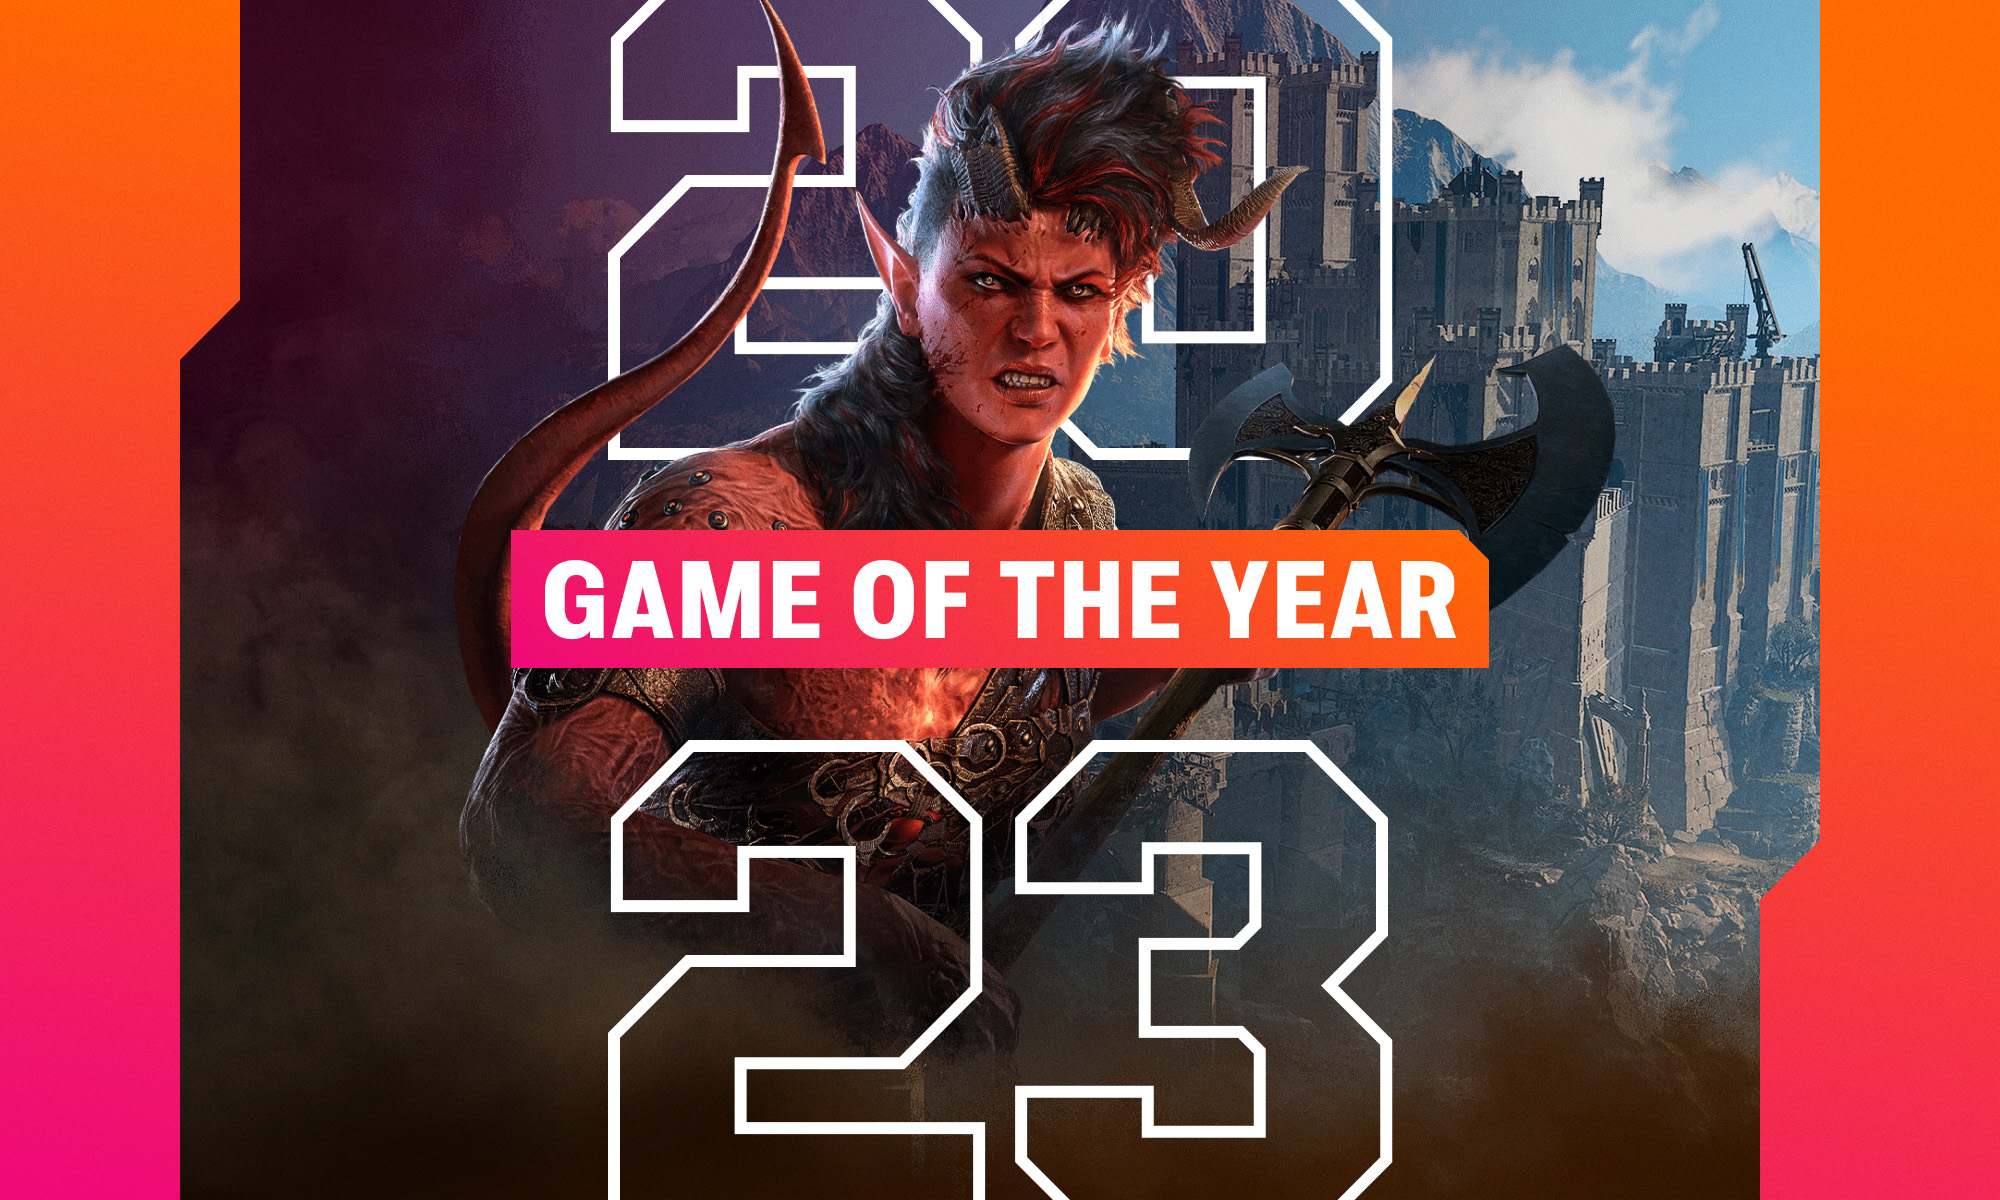 Baldur's Gate 3's Karlach appears on an image that says Game of the Year 2023.